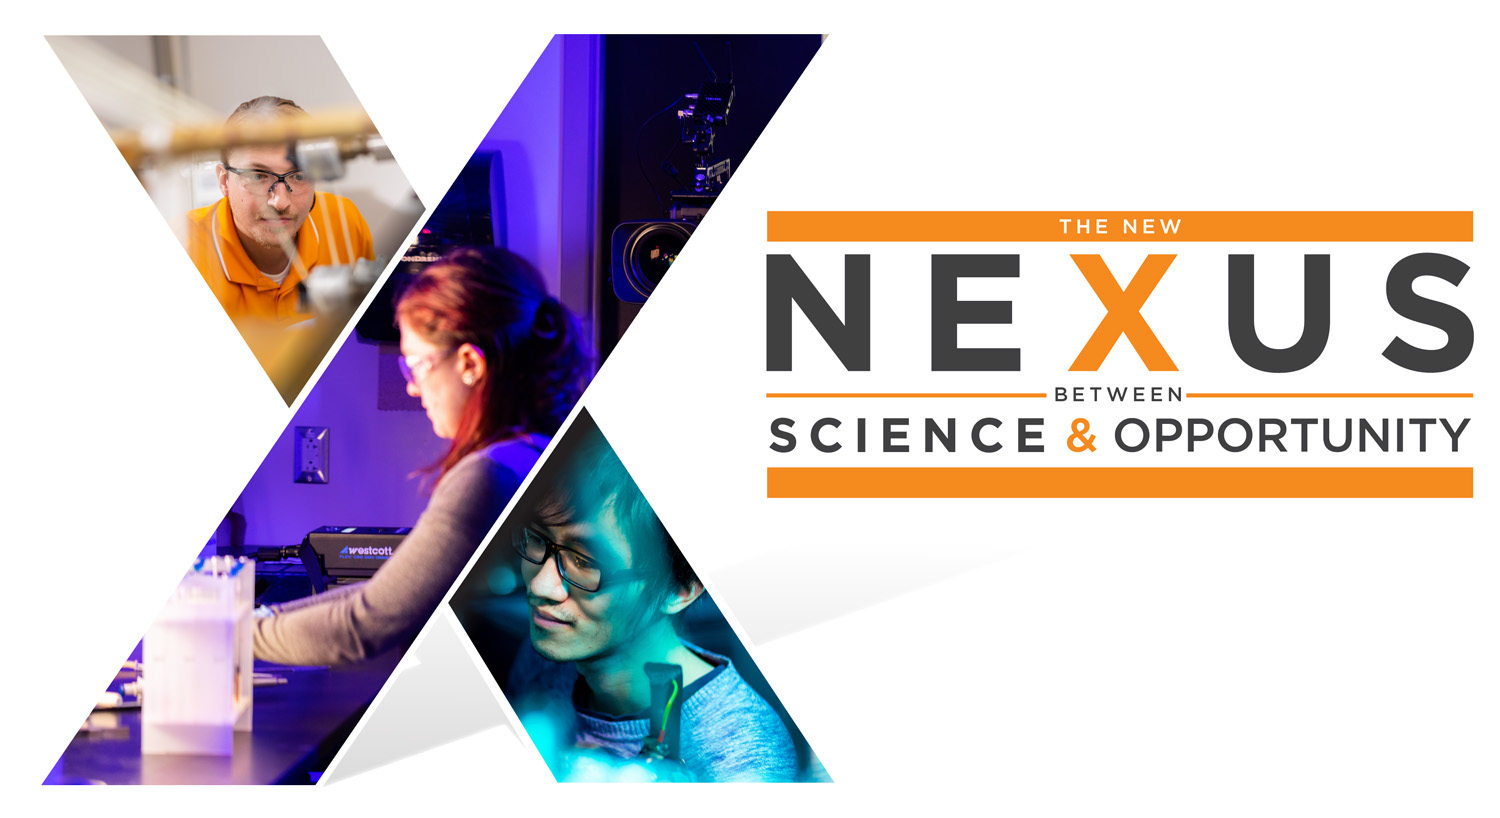 The New Nexus Between Science and Opportunity